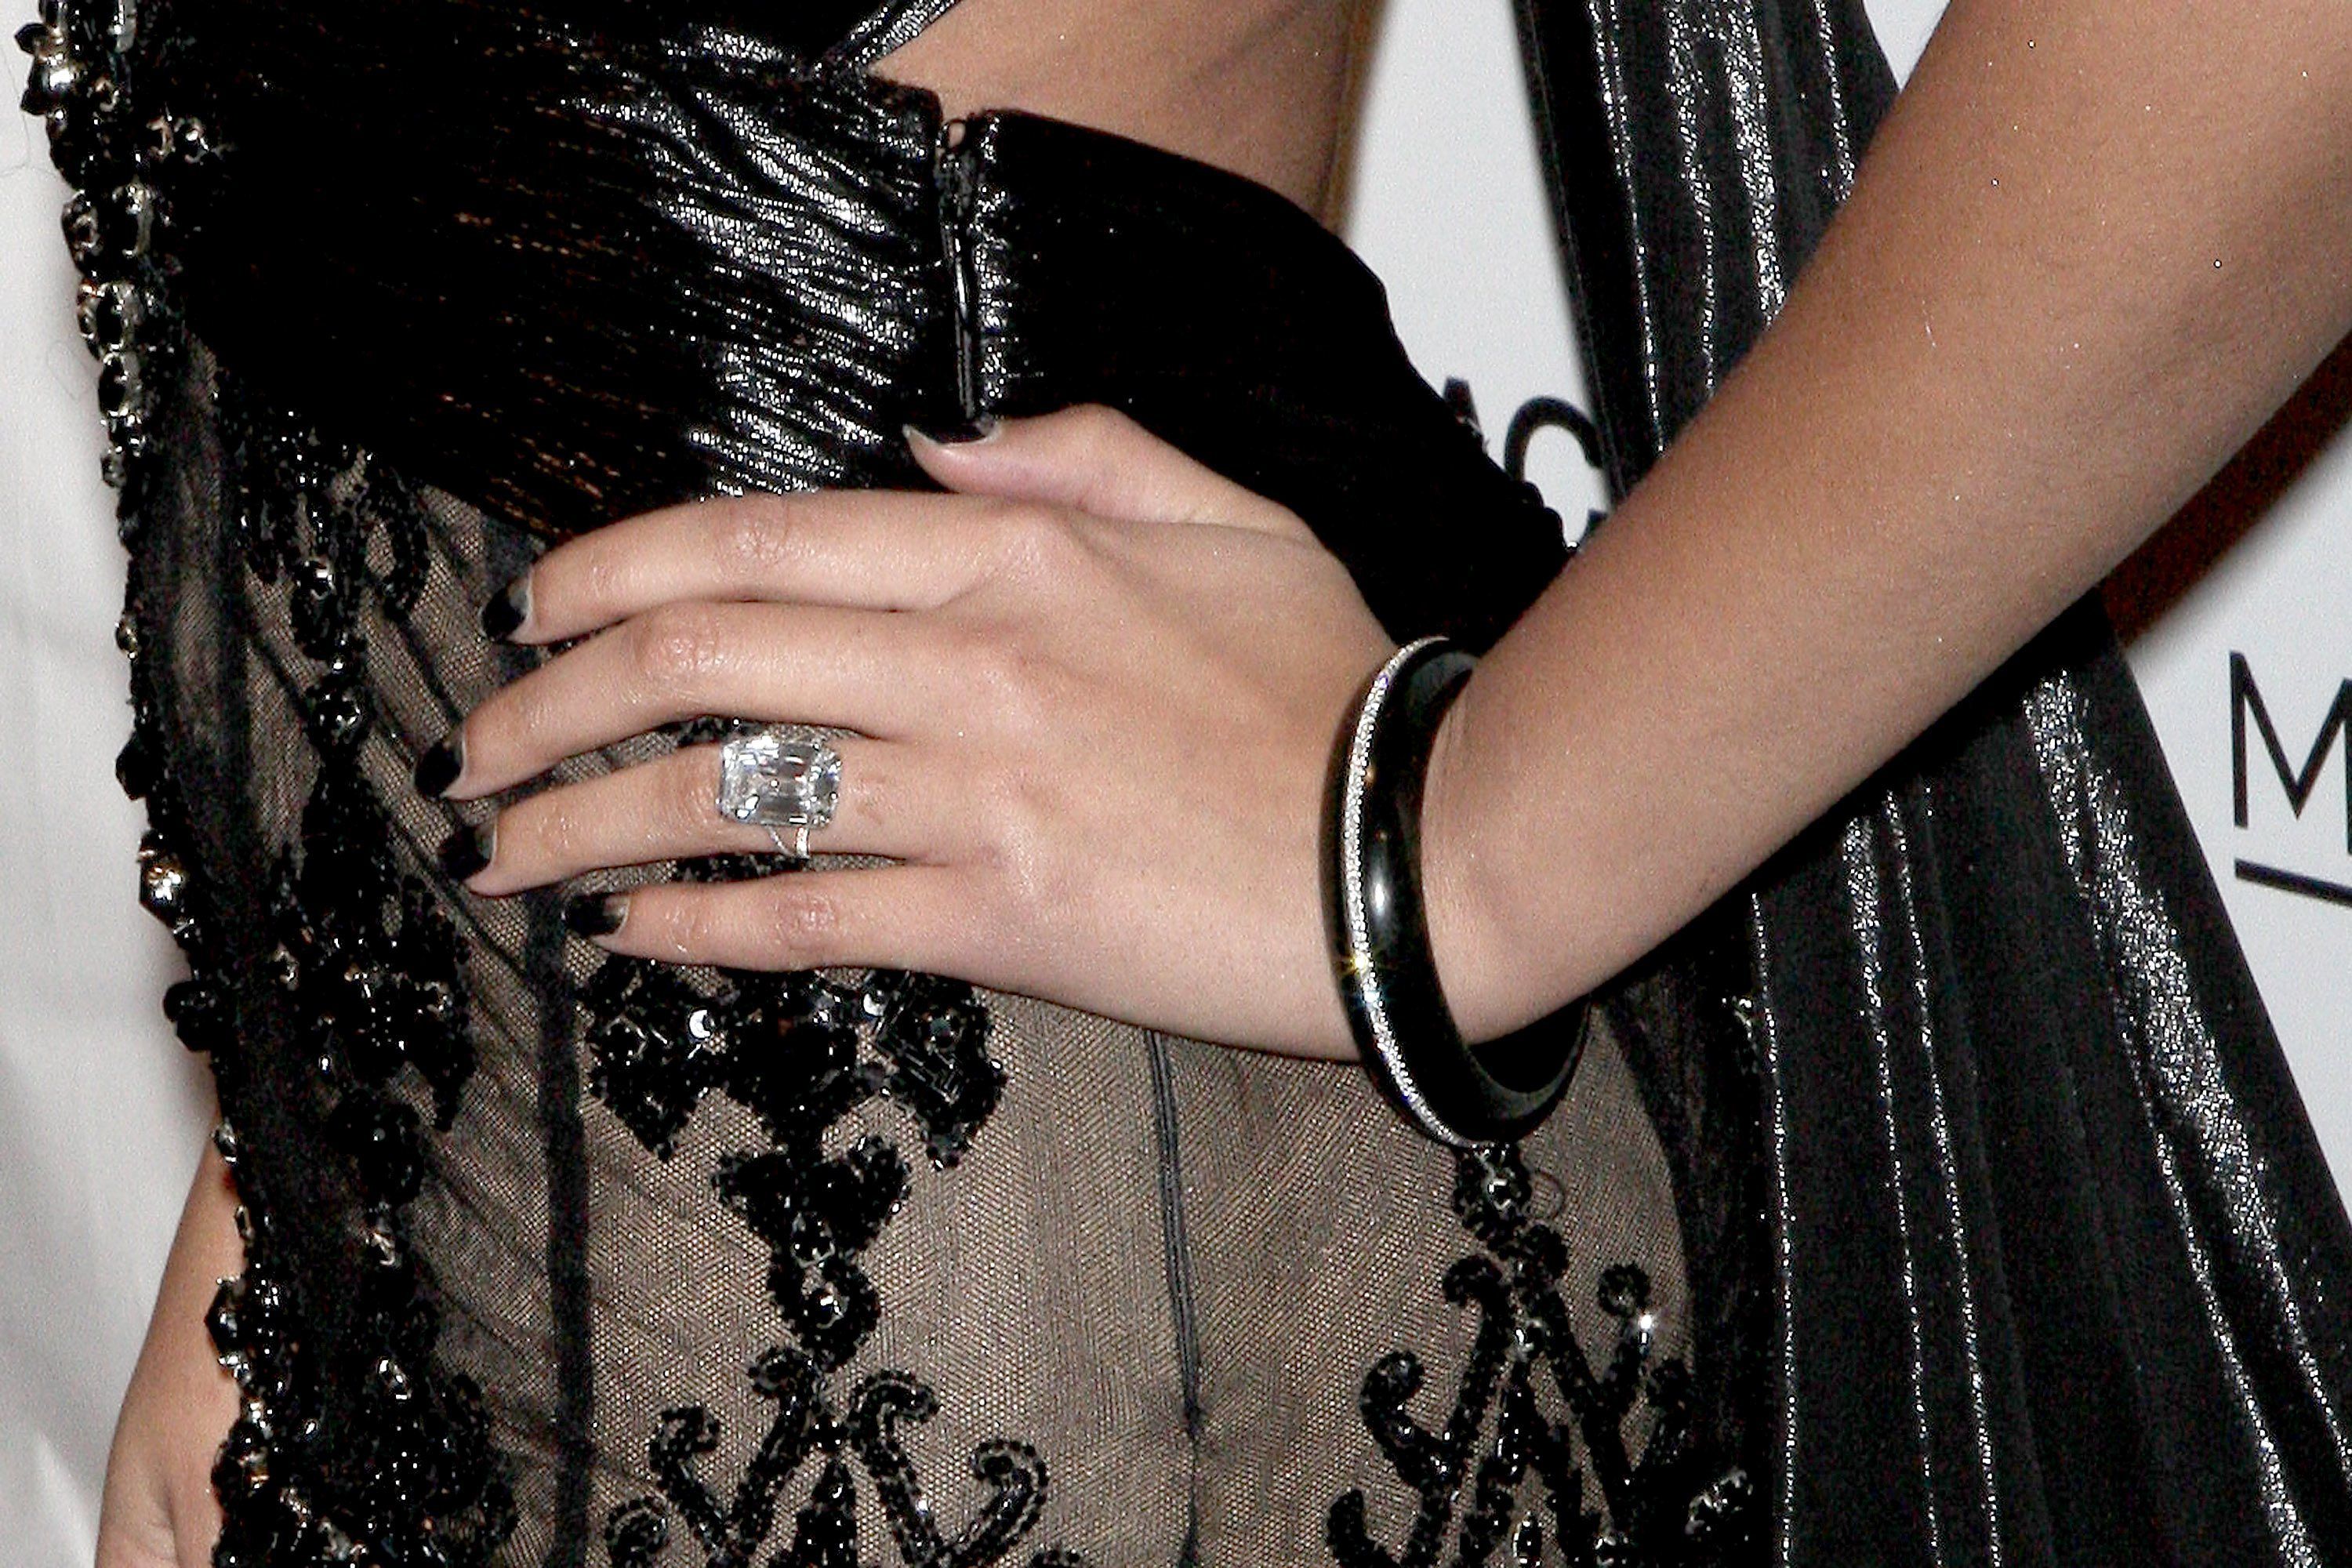 Beyonce Knowles's engagement diamond ring New York Premiere of 'Cadillac Records' at AMC Loews - Arrivals New York City, USA - 01.12.08 Credit: (Mandatory): PNP/ WENN